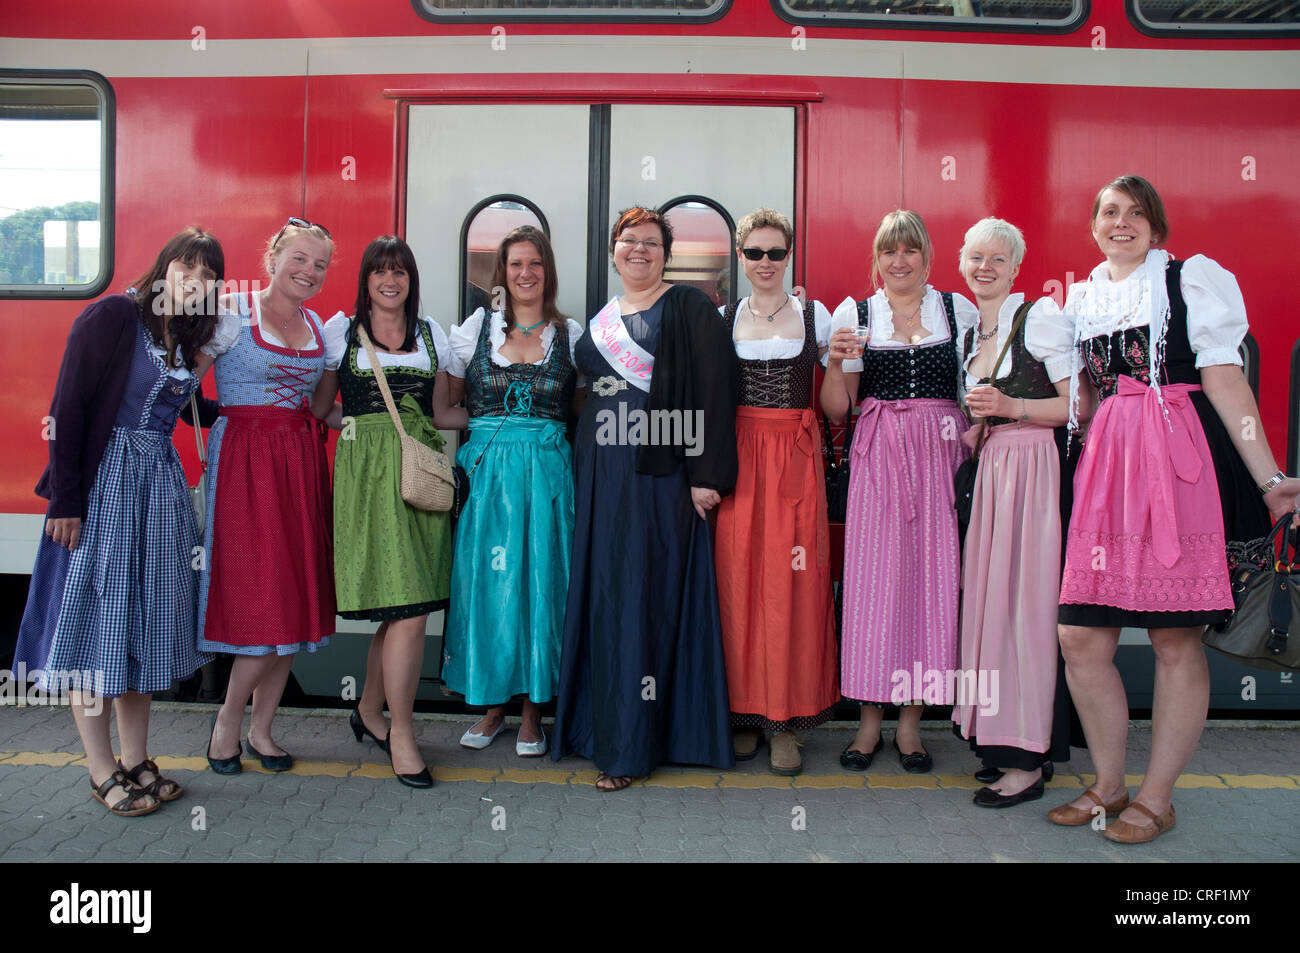 Young women wearing traditional Austrian or Bavarian costume returning home from a pre-wedding or 'hens' party' Stock Photo